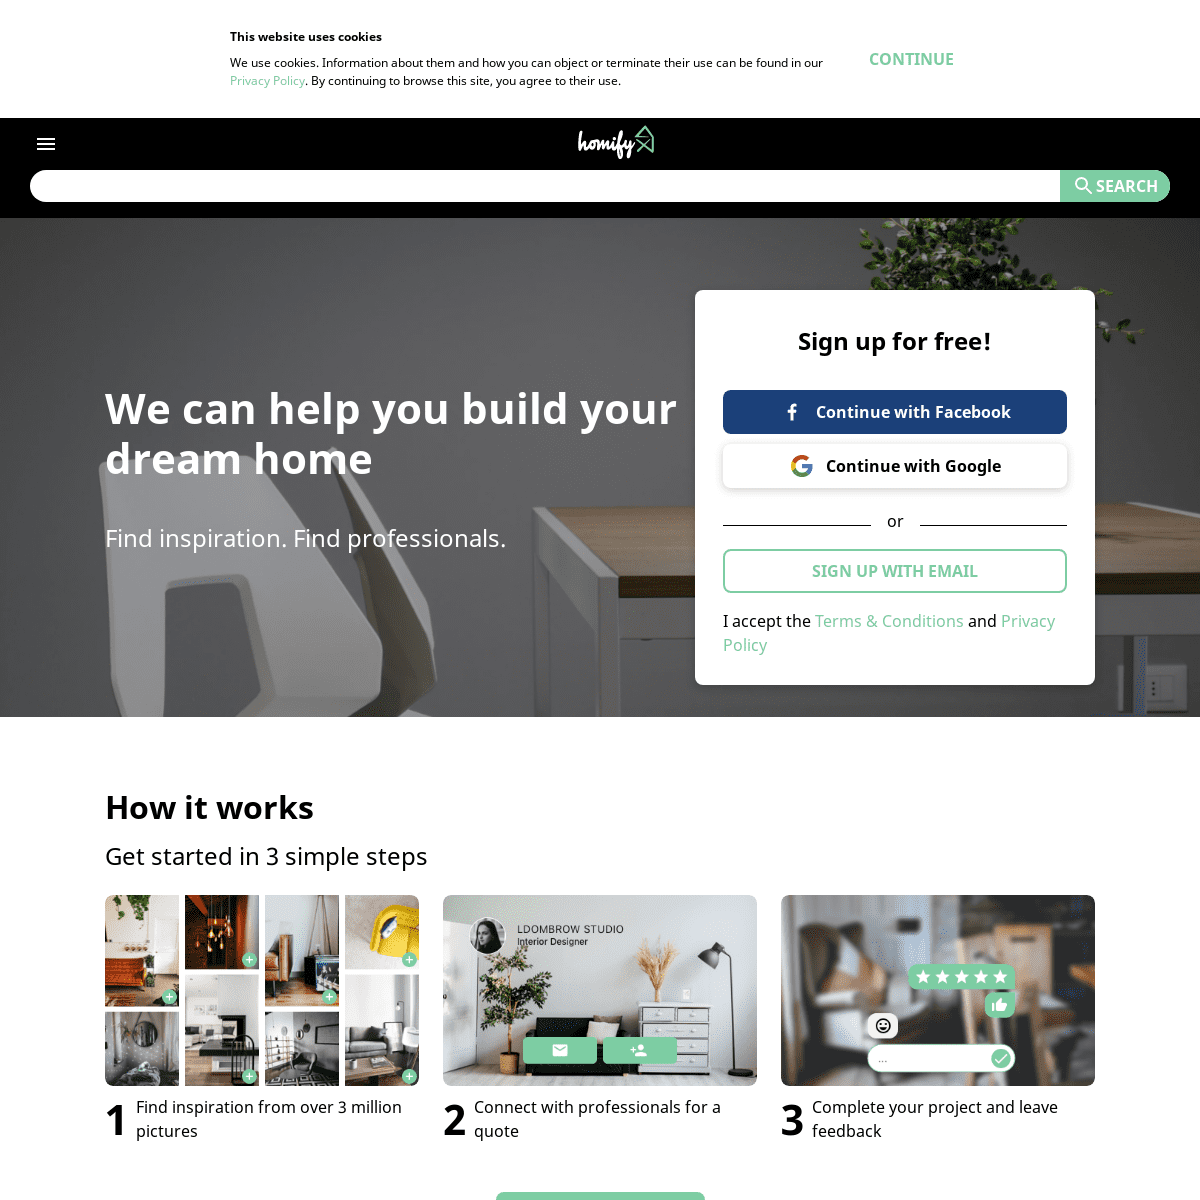 A complete backup of https://homify.ca